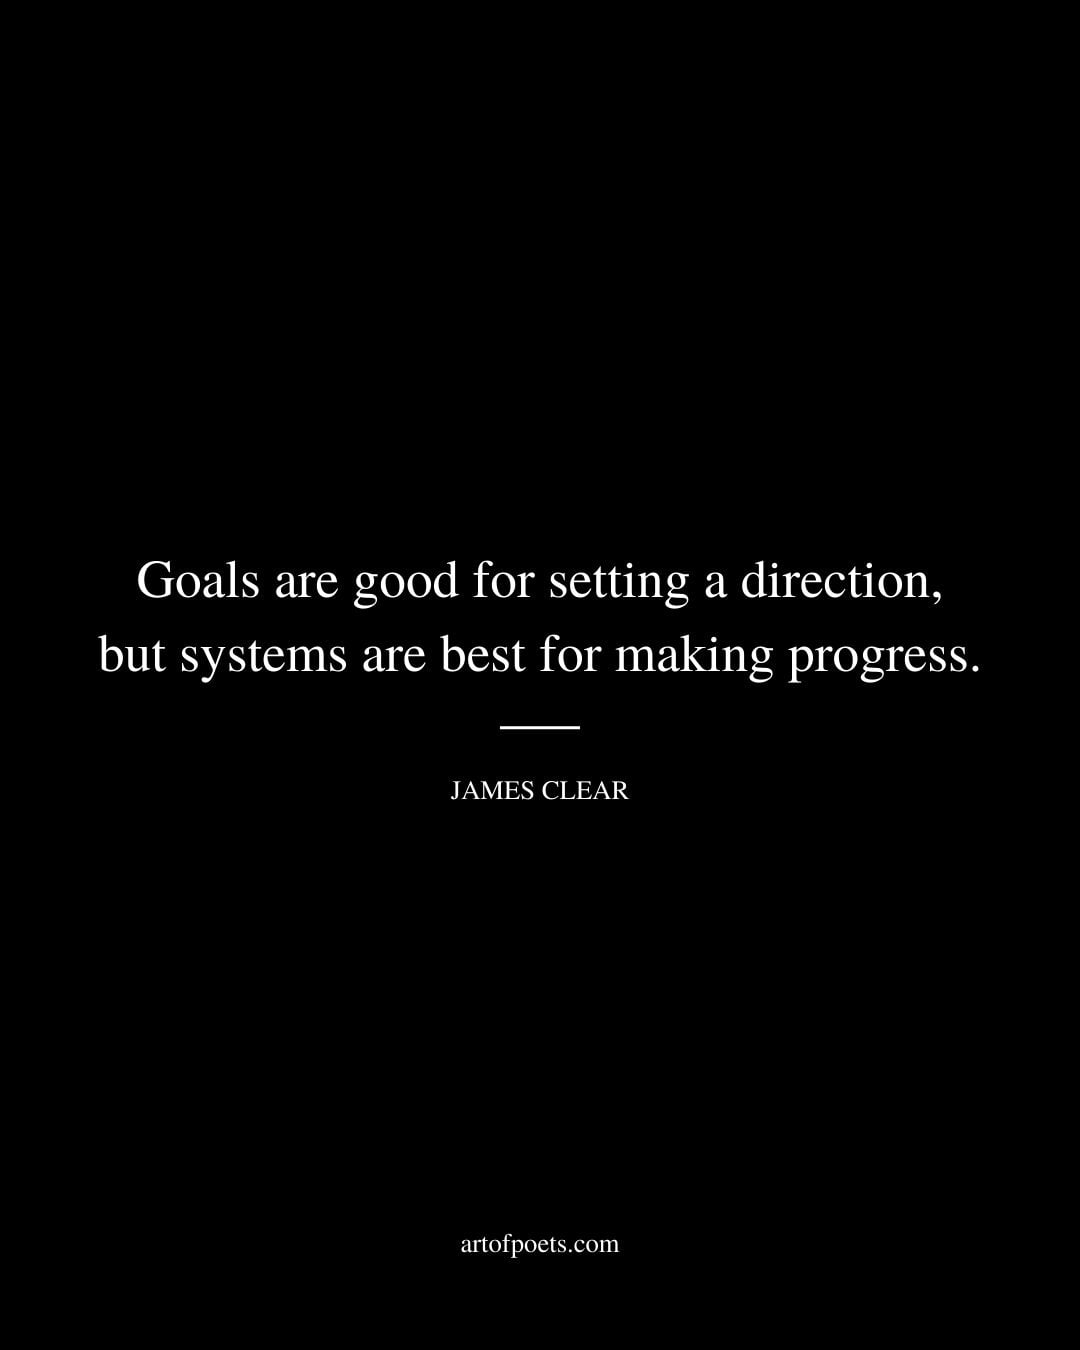 Goals are good for setting a direction but systems are best for making progress